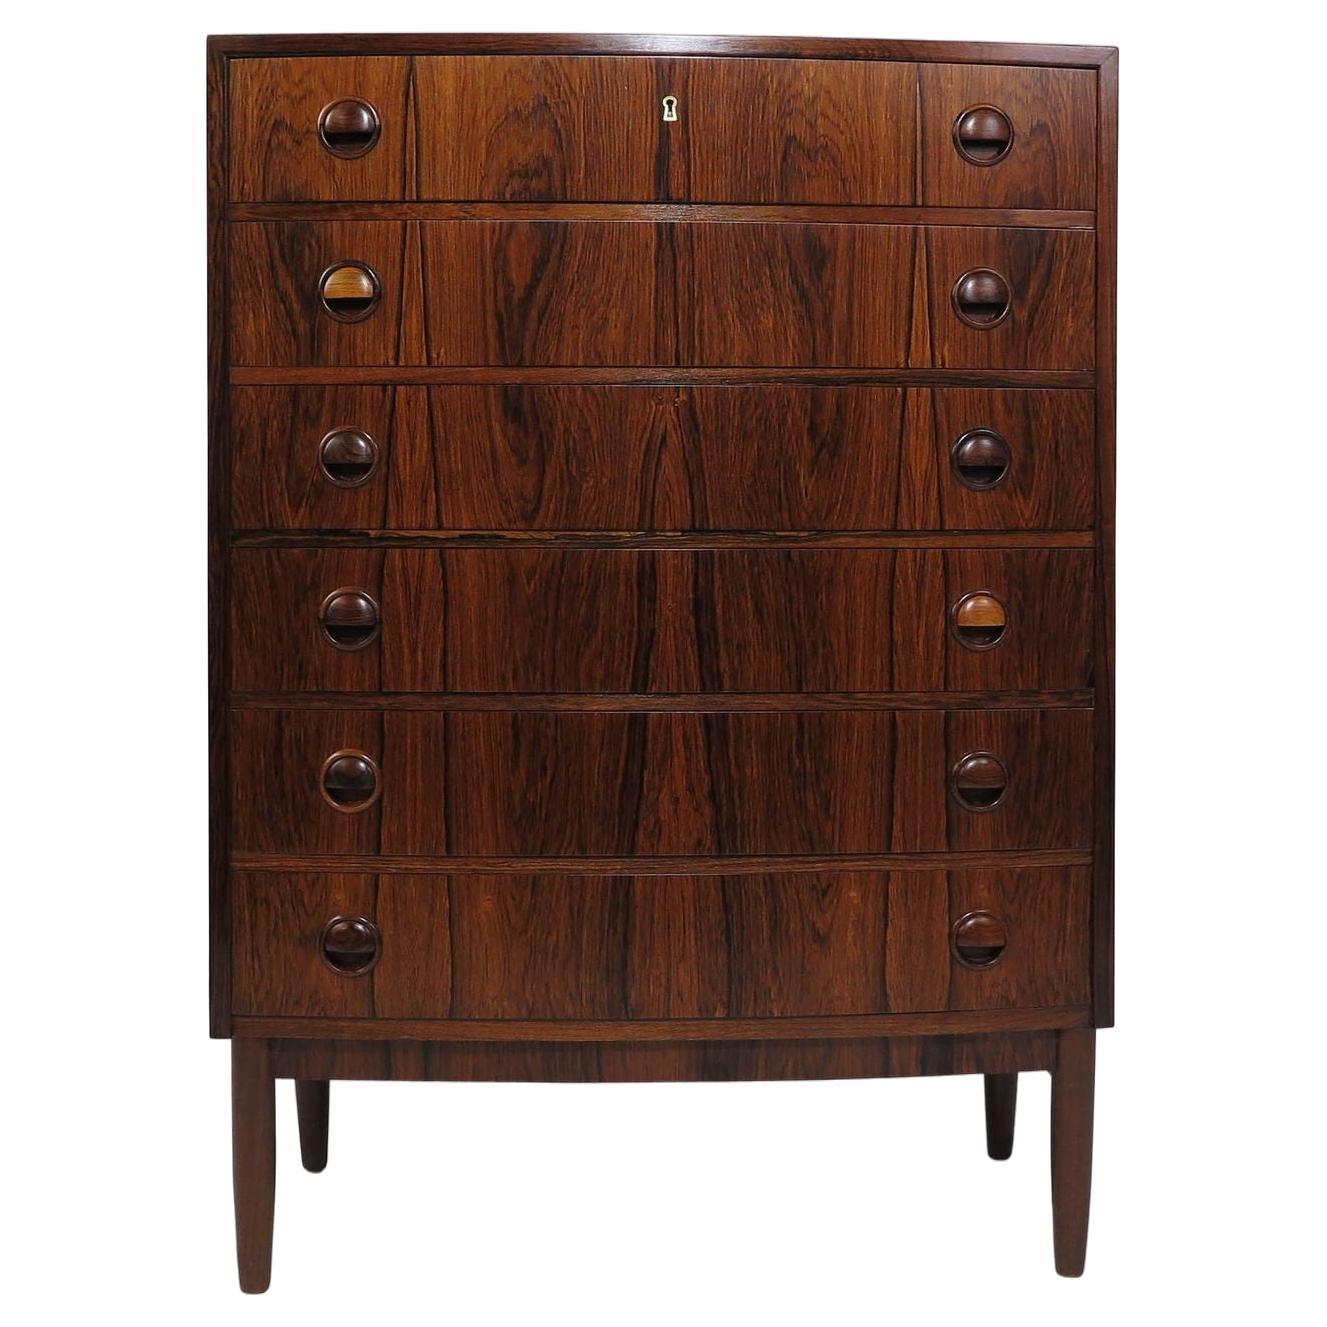 Kai Kristiansen Brazilian Rosewood Chest of Drawers For Sale